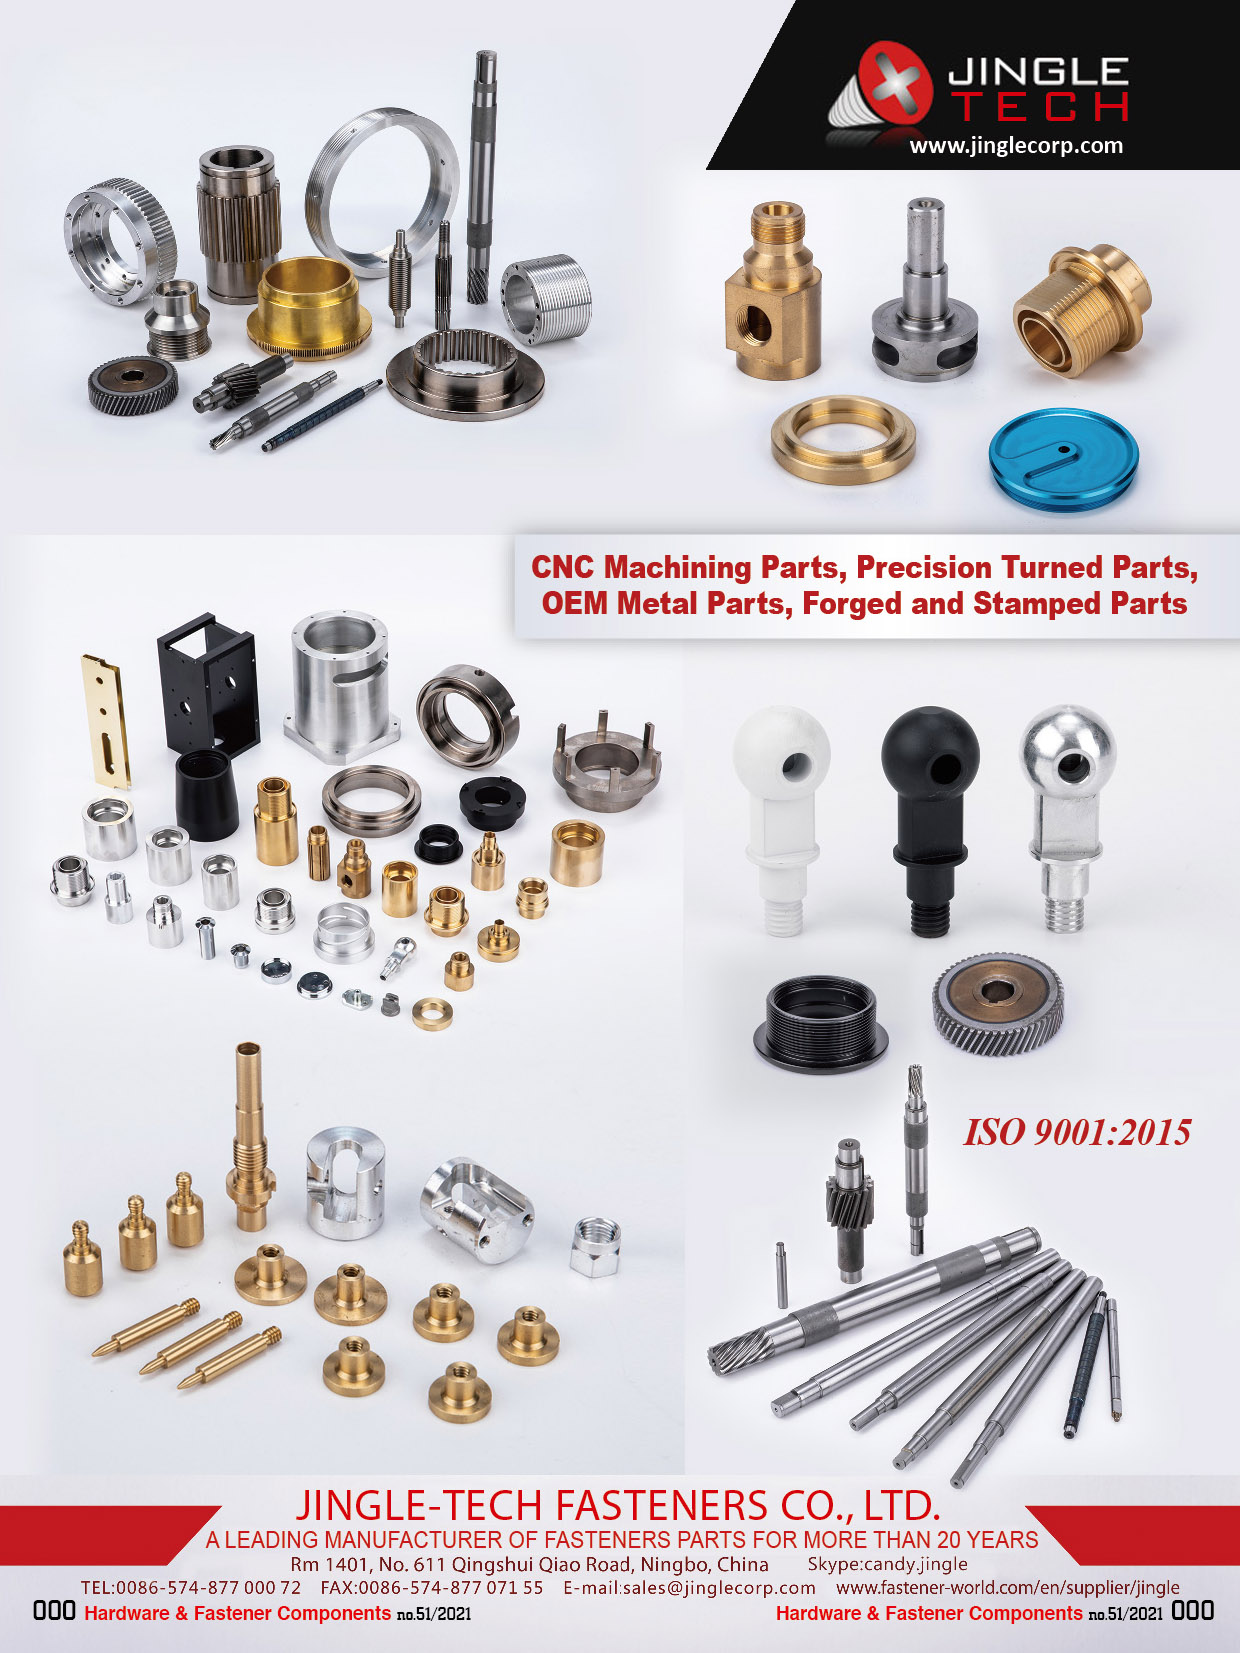 Non-standard Hexagon Head Screws / Bolts Standard & Non-Standard Fasteners,CNC Nachining Parts,Precision Turned Parts,OEM Metal Parts,Forged and Stamped Parts